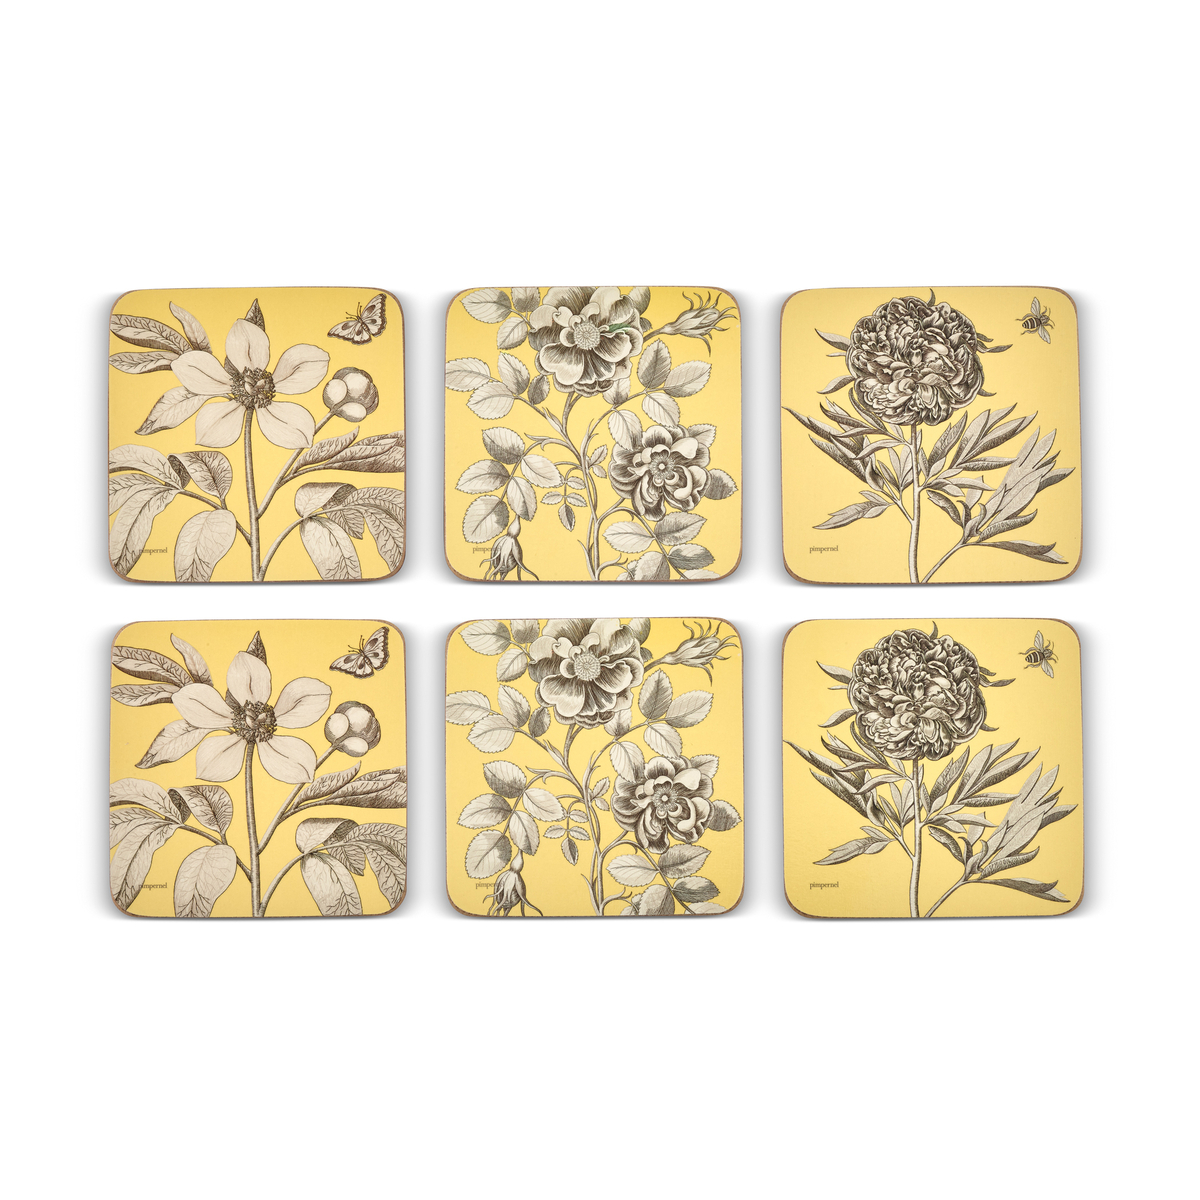 Pimpernel Sanderson Etchings & Roses Yellow table mats 6 Place mats and Coasters 